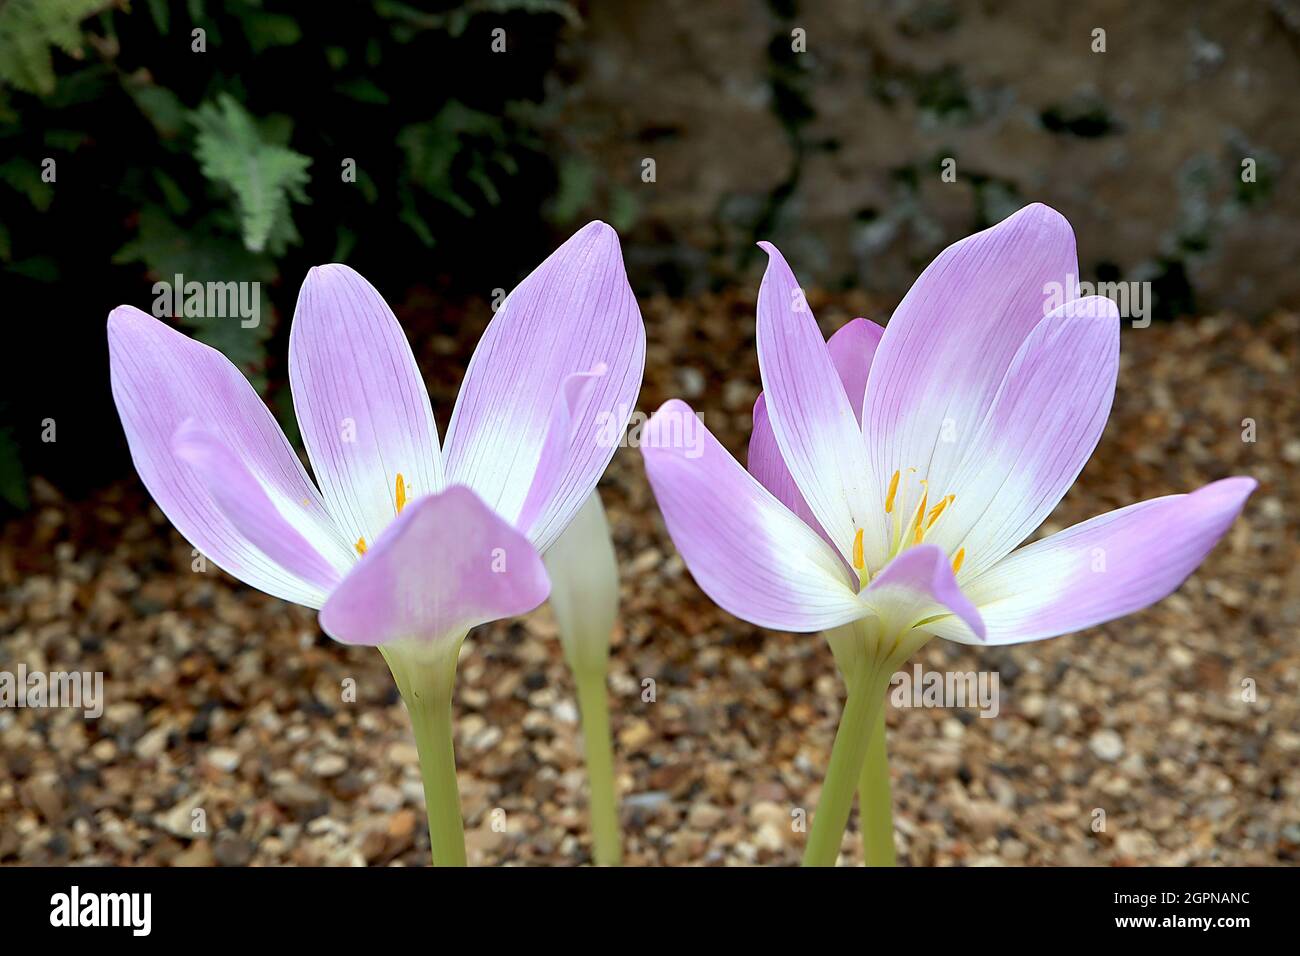 Colchicum speciosum giant meadow saffron - lavender pink funnel-shaped flowers with white centre on white stems,  September, England, UK Stock Photo